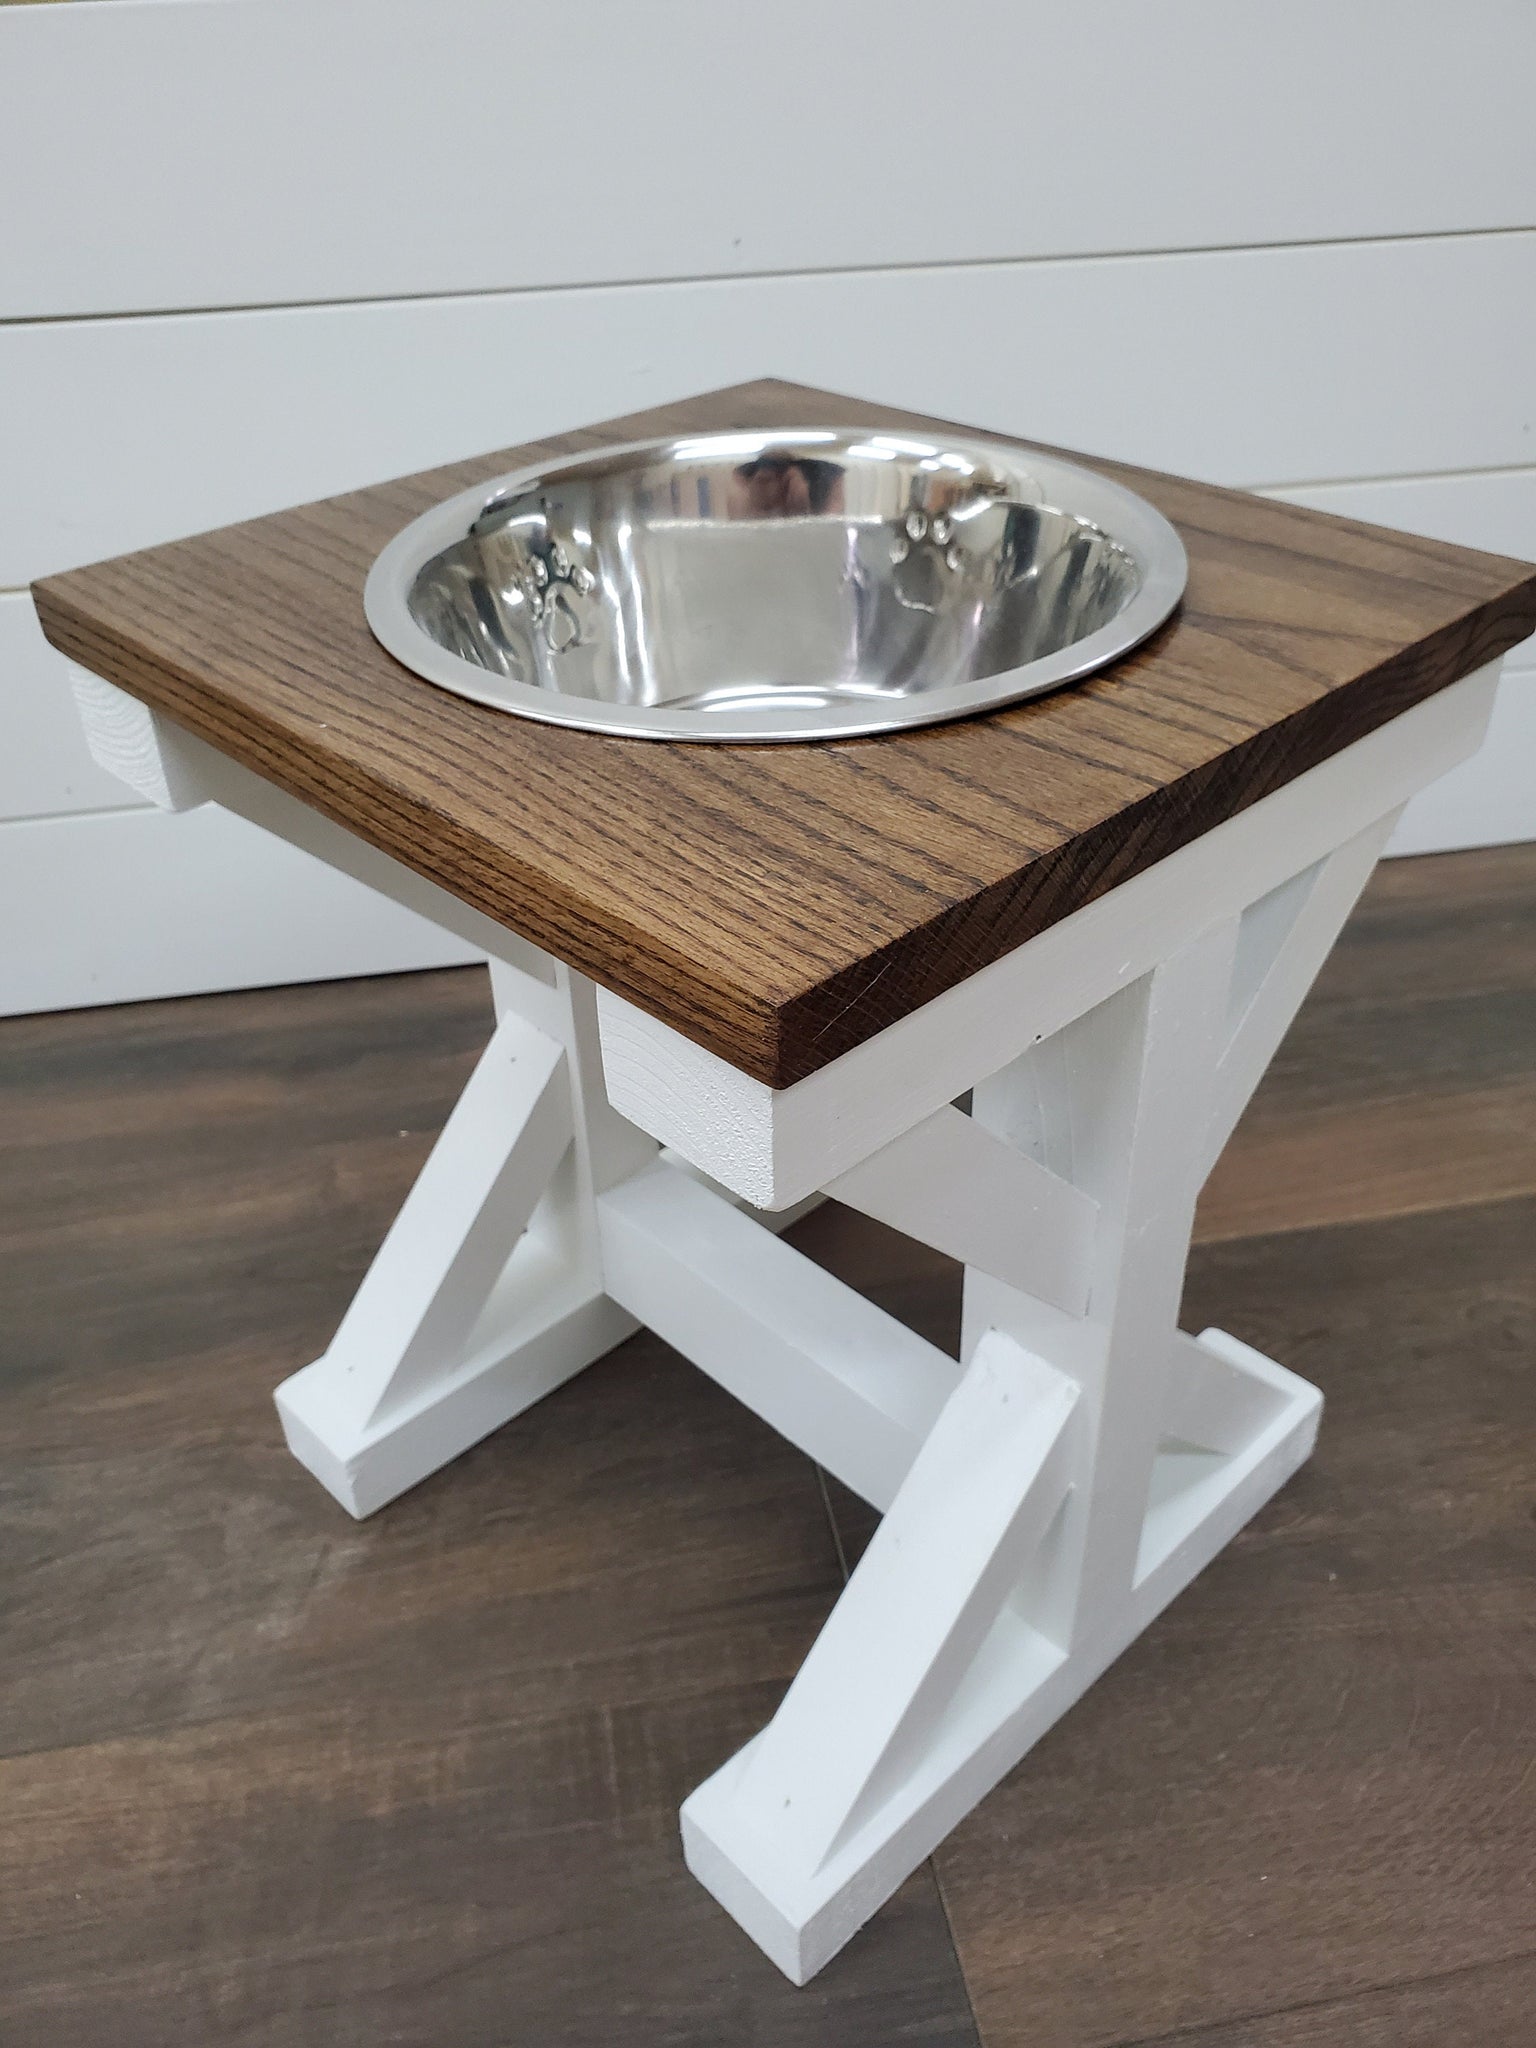 Dog Bowl Stand Large/tall Dog Bowl Stand Farmhouse Style Rustic